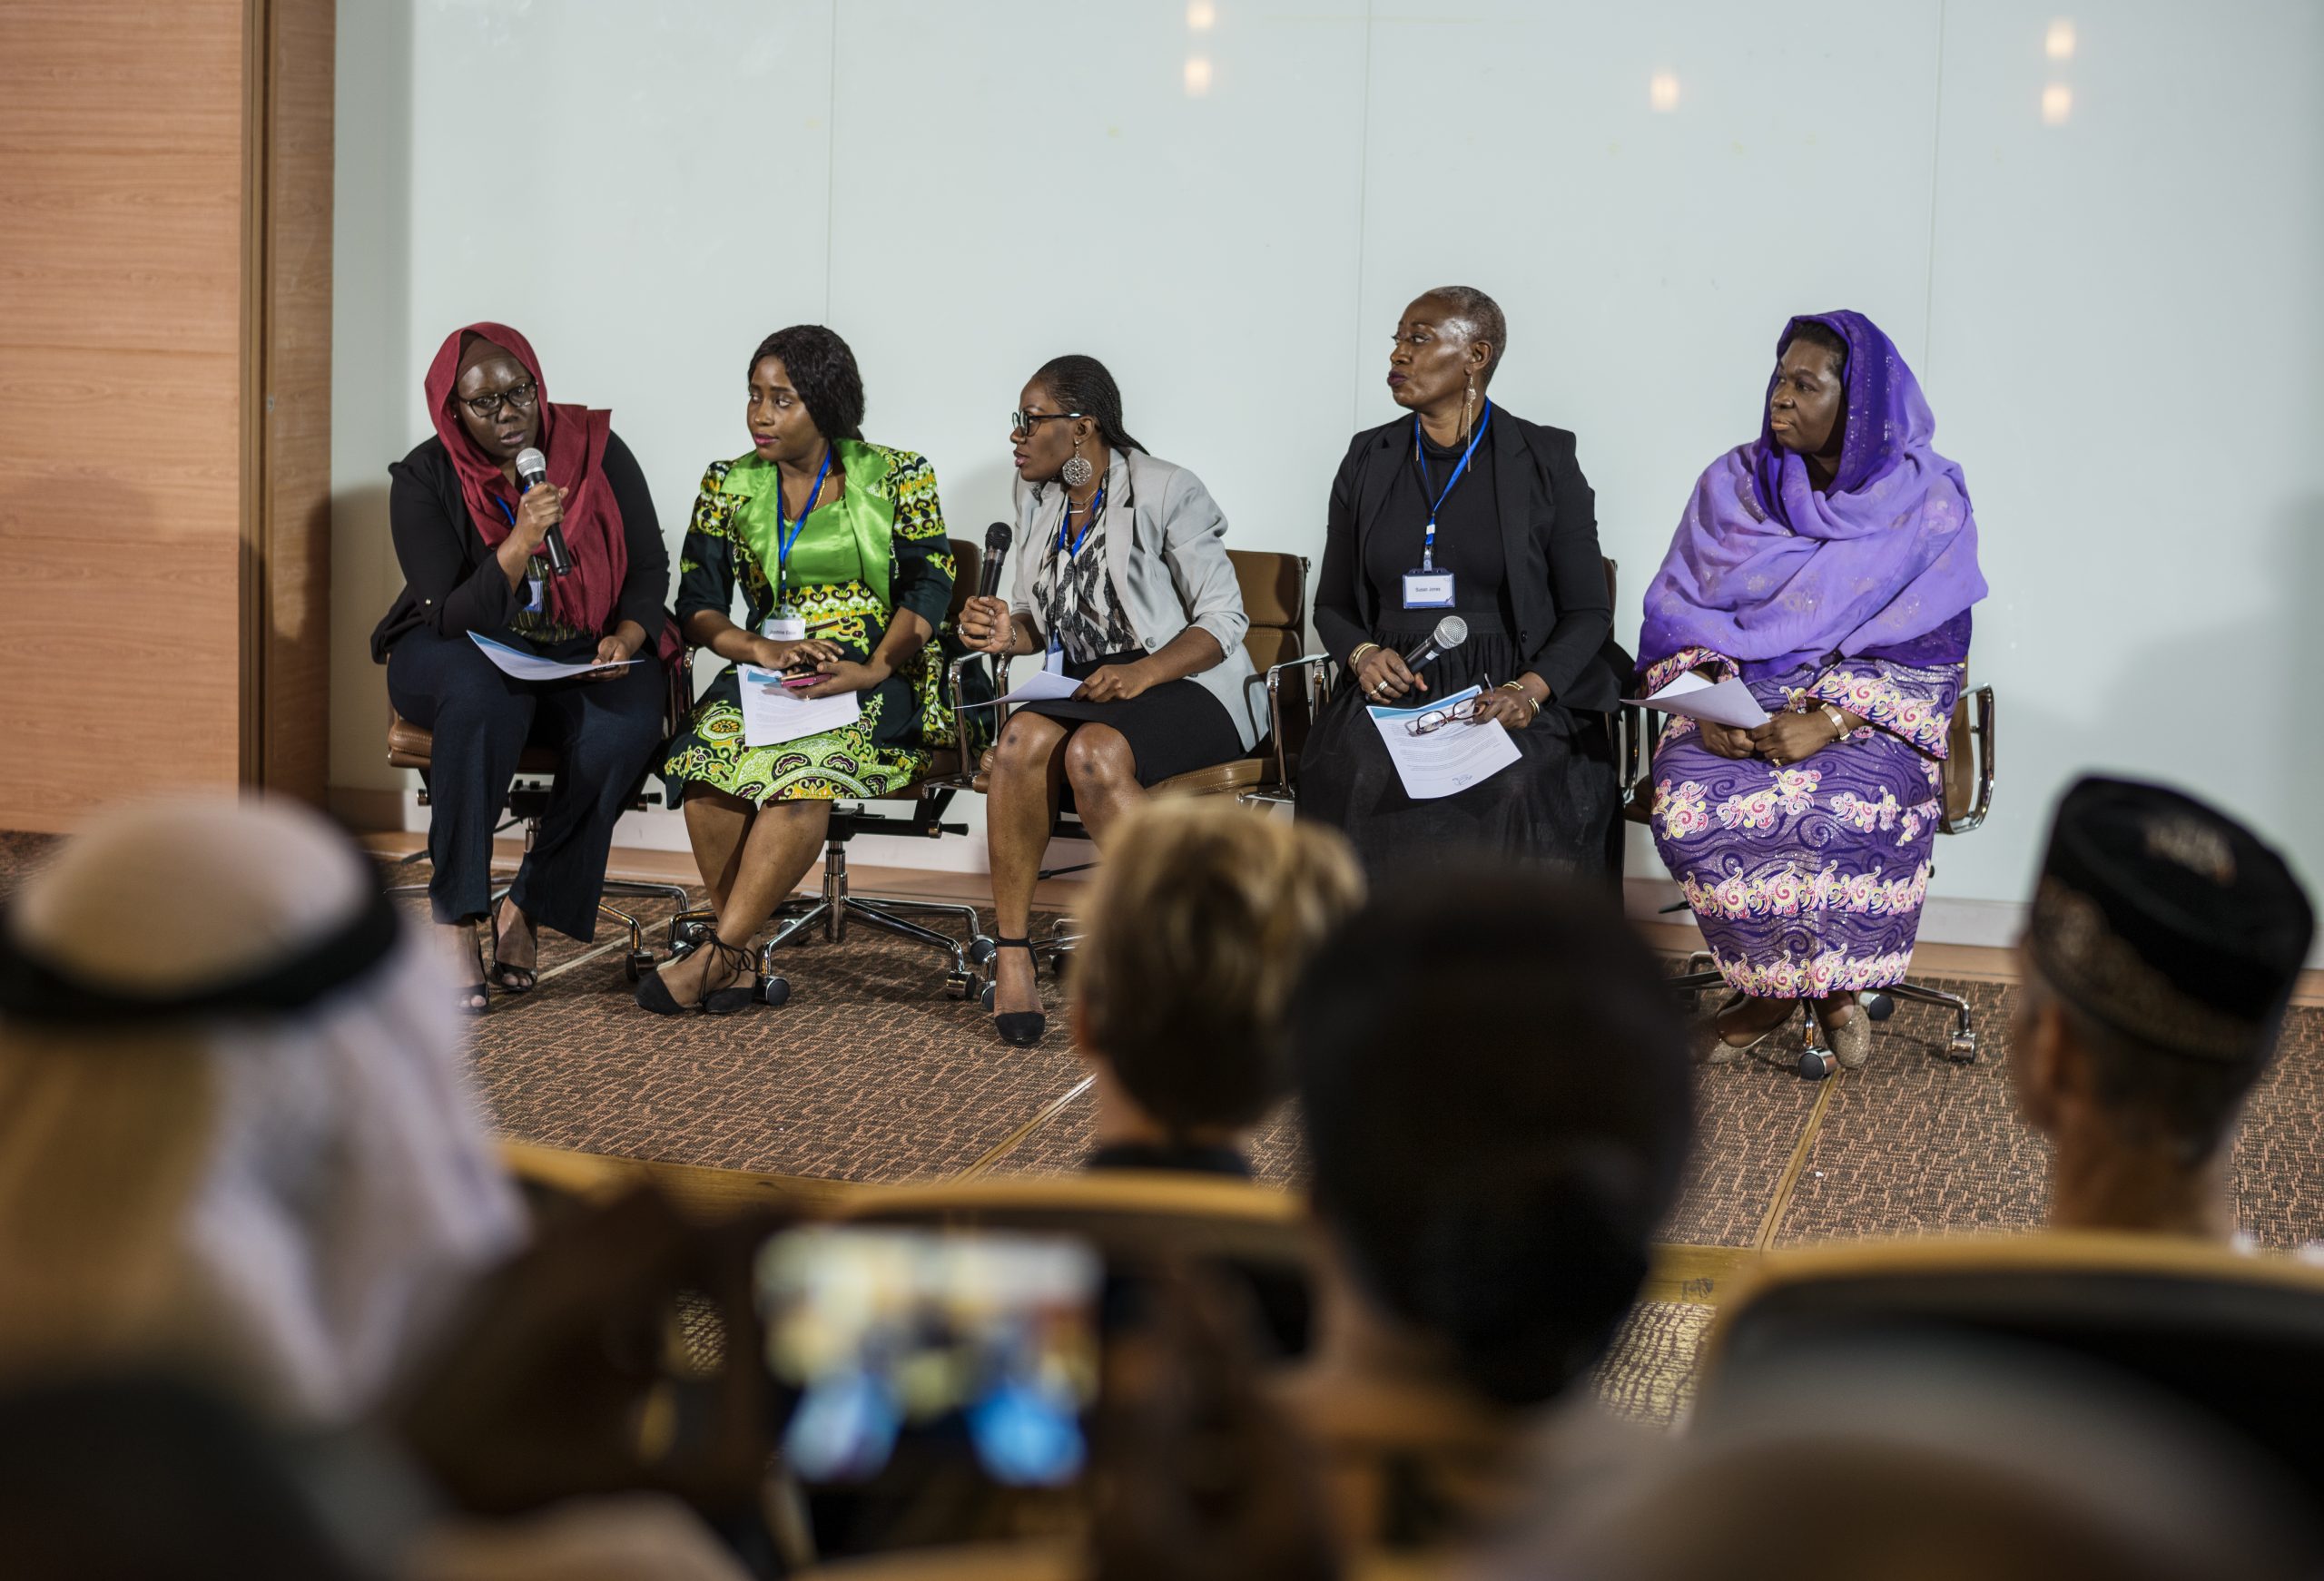 An African woman speaks on a panel with four other African women